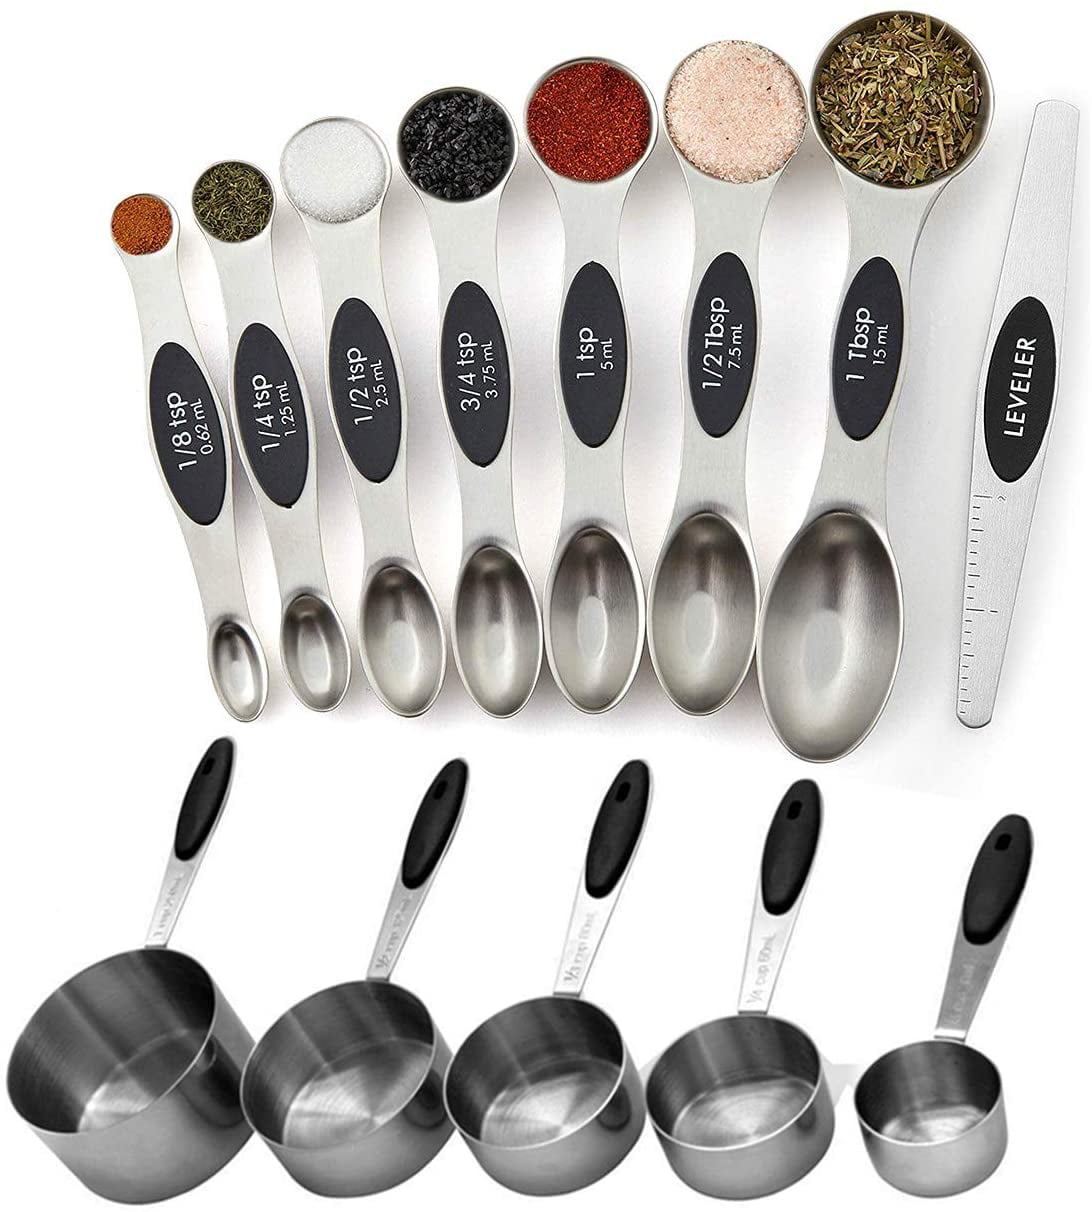 Measuring Cups and Magnetic Measuring Spoons Set Stainless Steel 5 Cups and 7 Spoons 